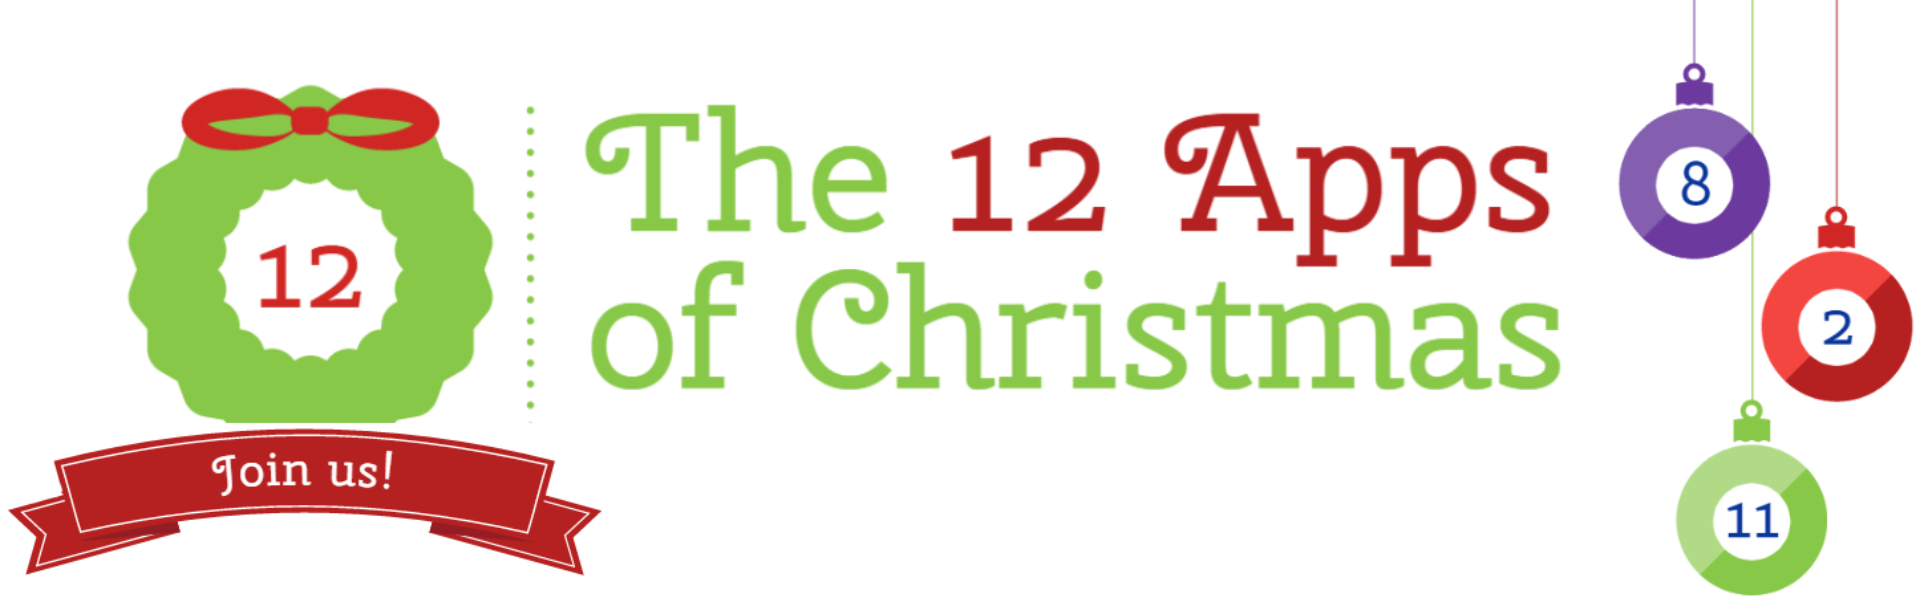 12 Apps of Christmas